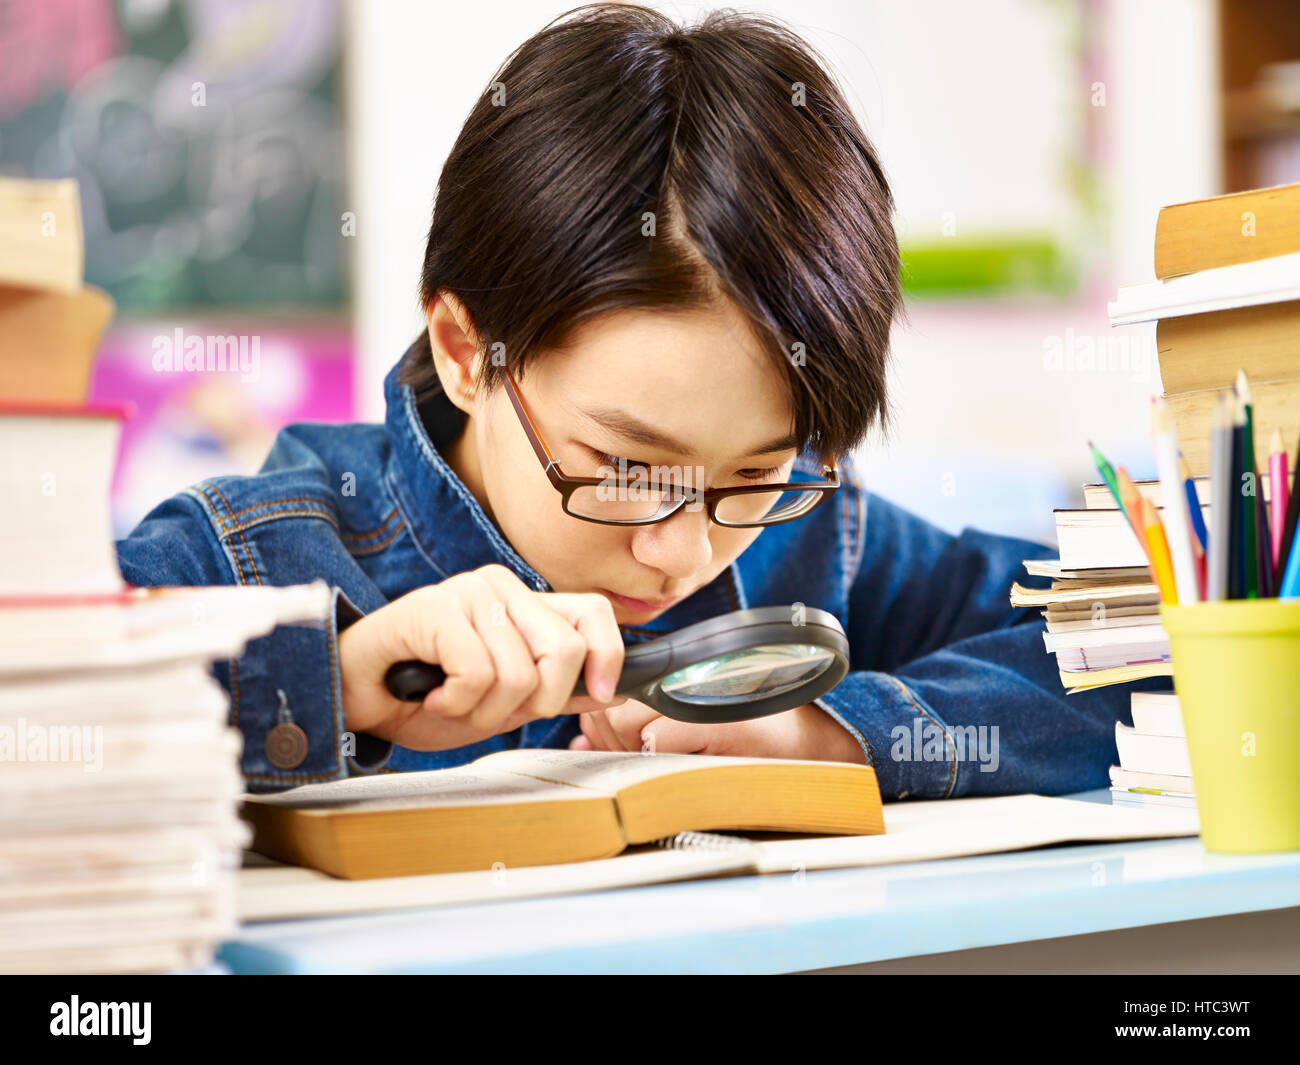 asian pupil with glasses using a magnifier to enlarge the words in a thick book. Stock Photo